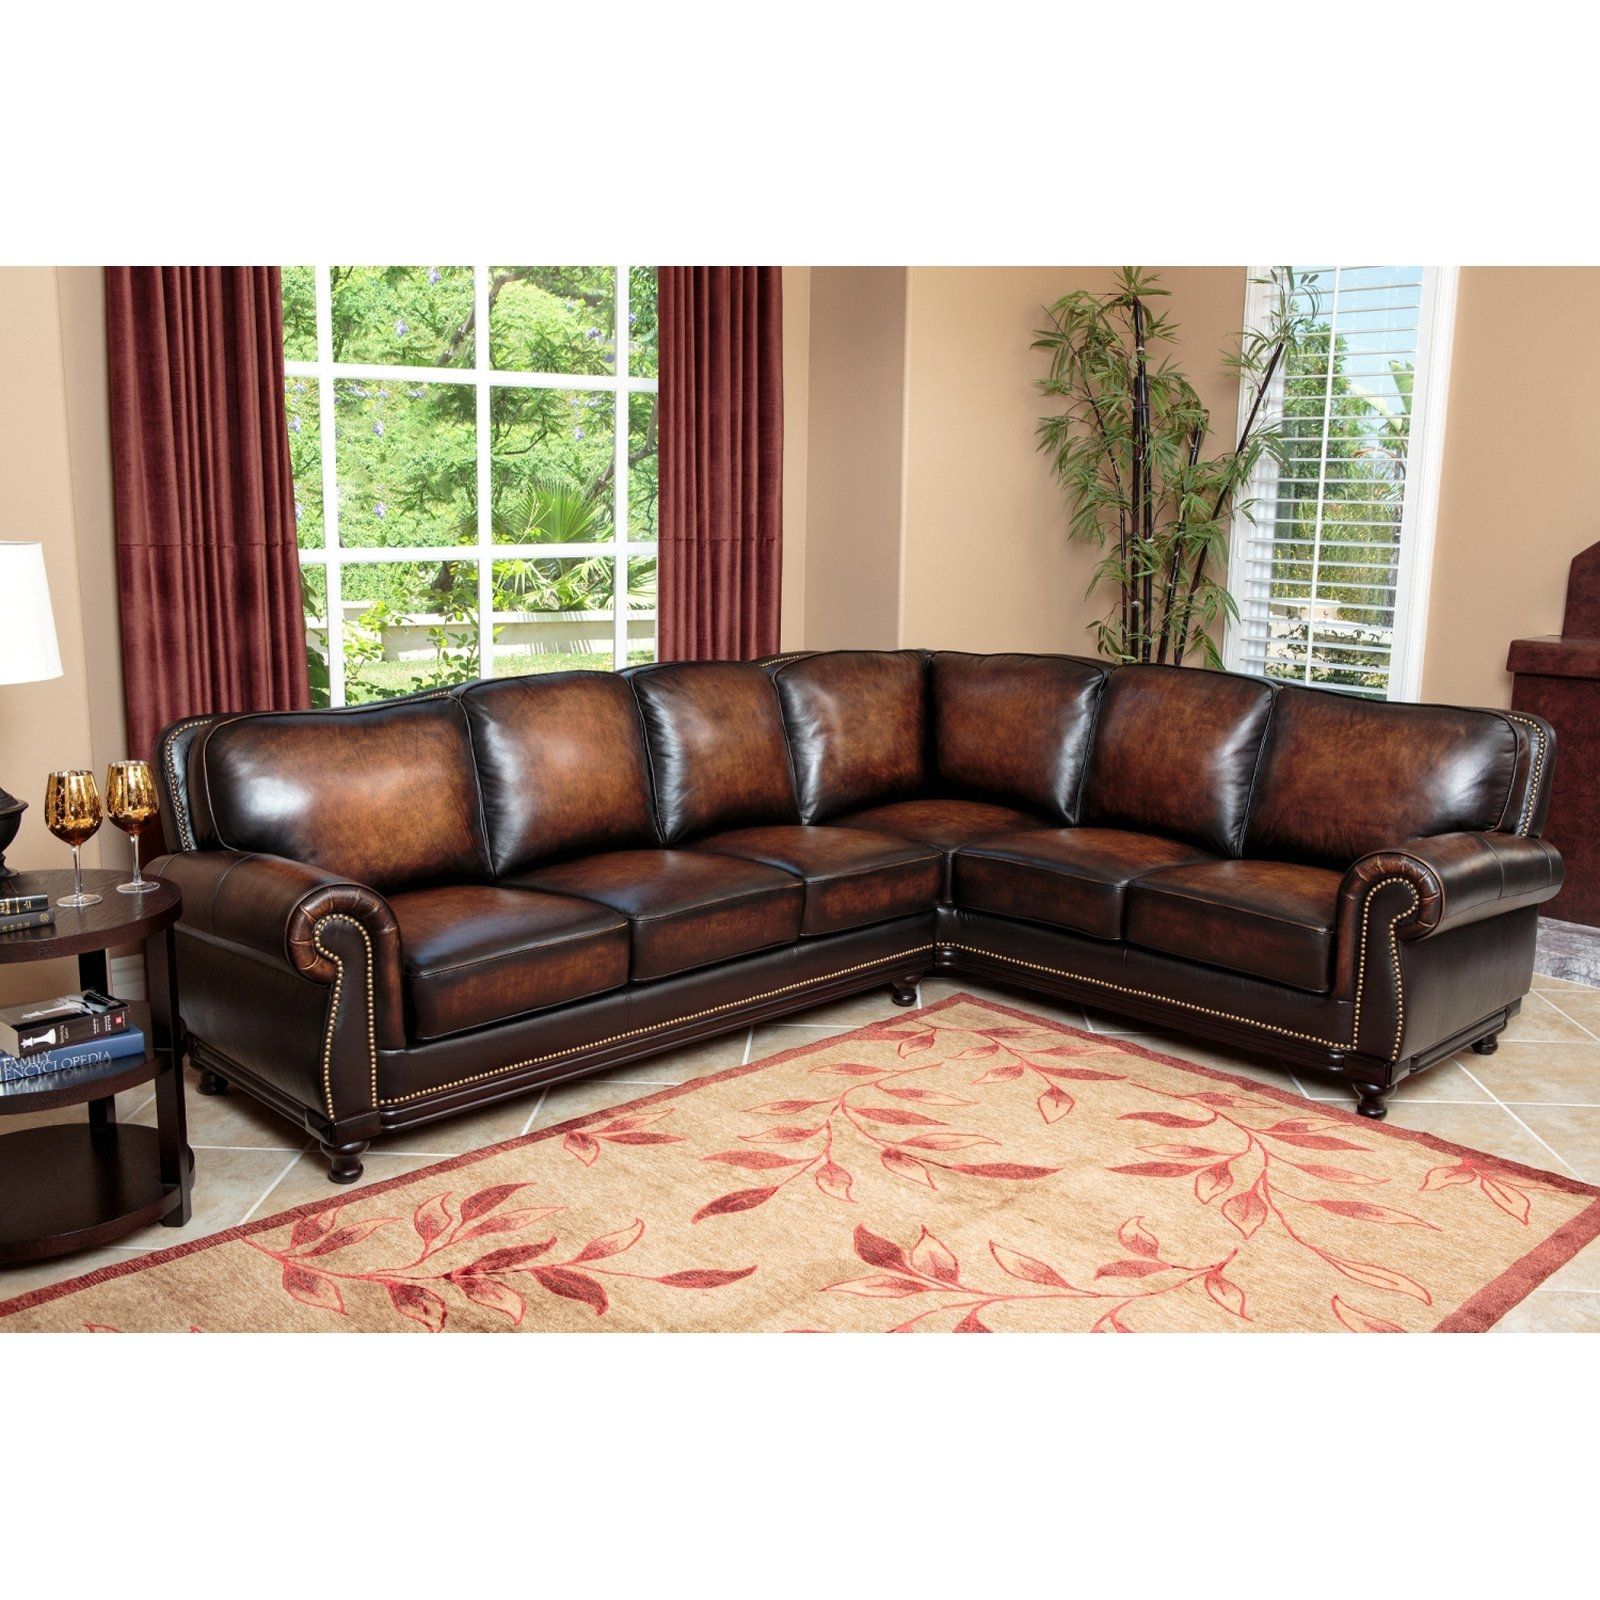 Abson Nizza Hand Rubbed Leather Sectional Sofa Brown In Abbyson Sectional Sofa (View 3 of 12)